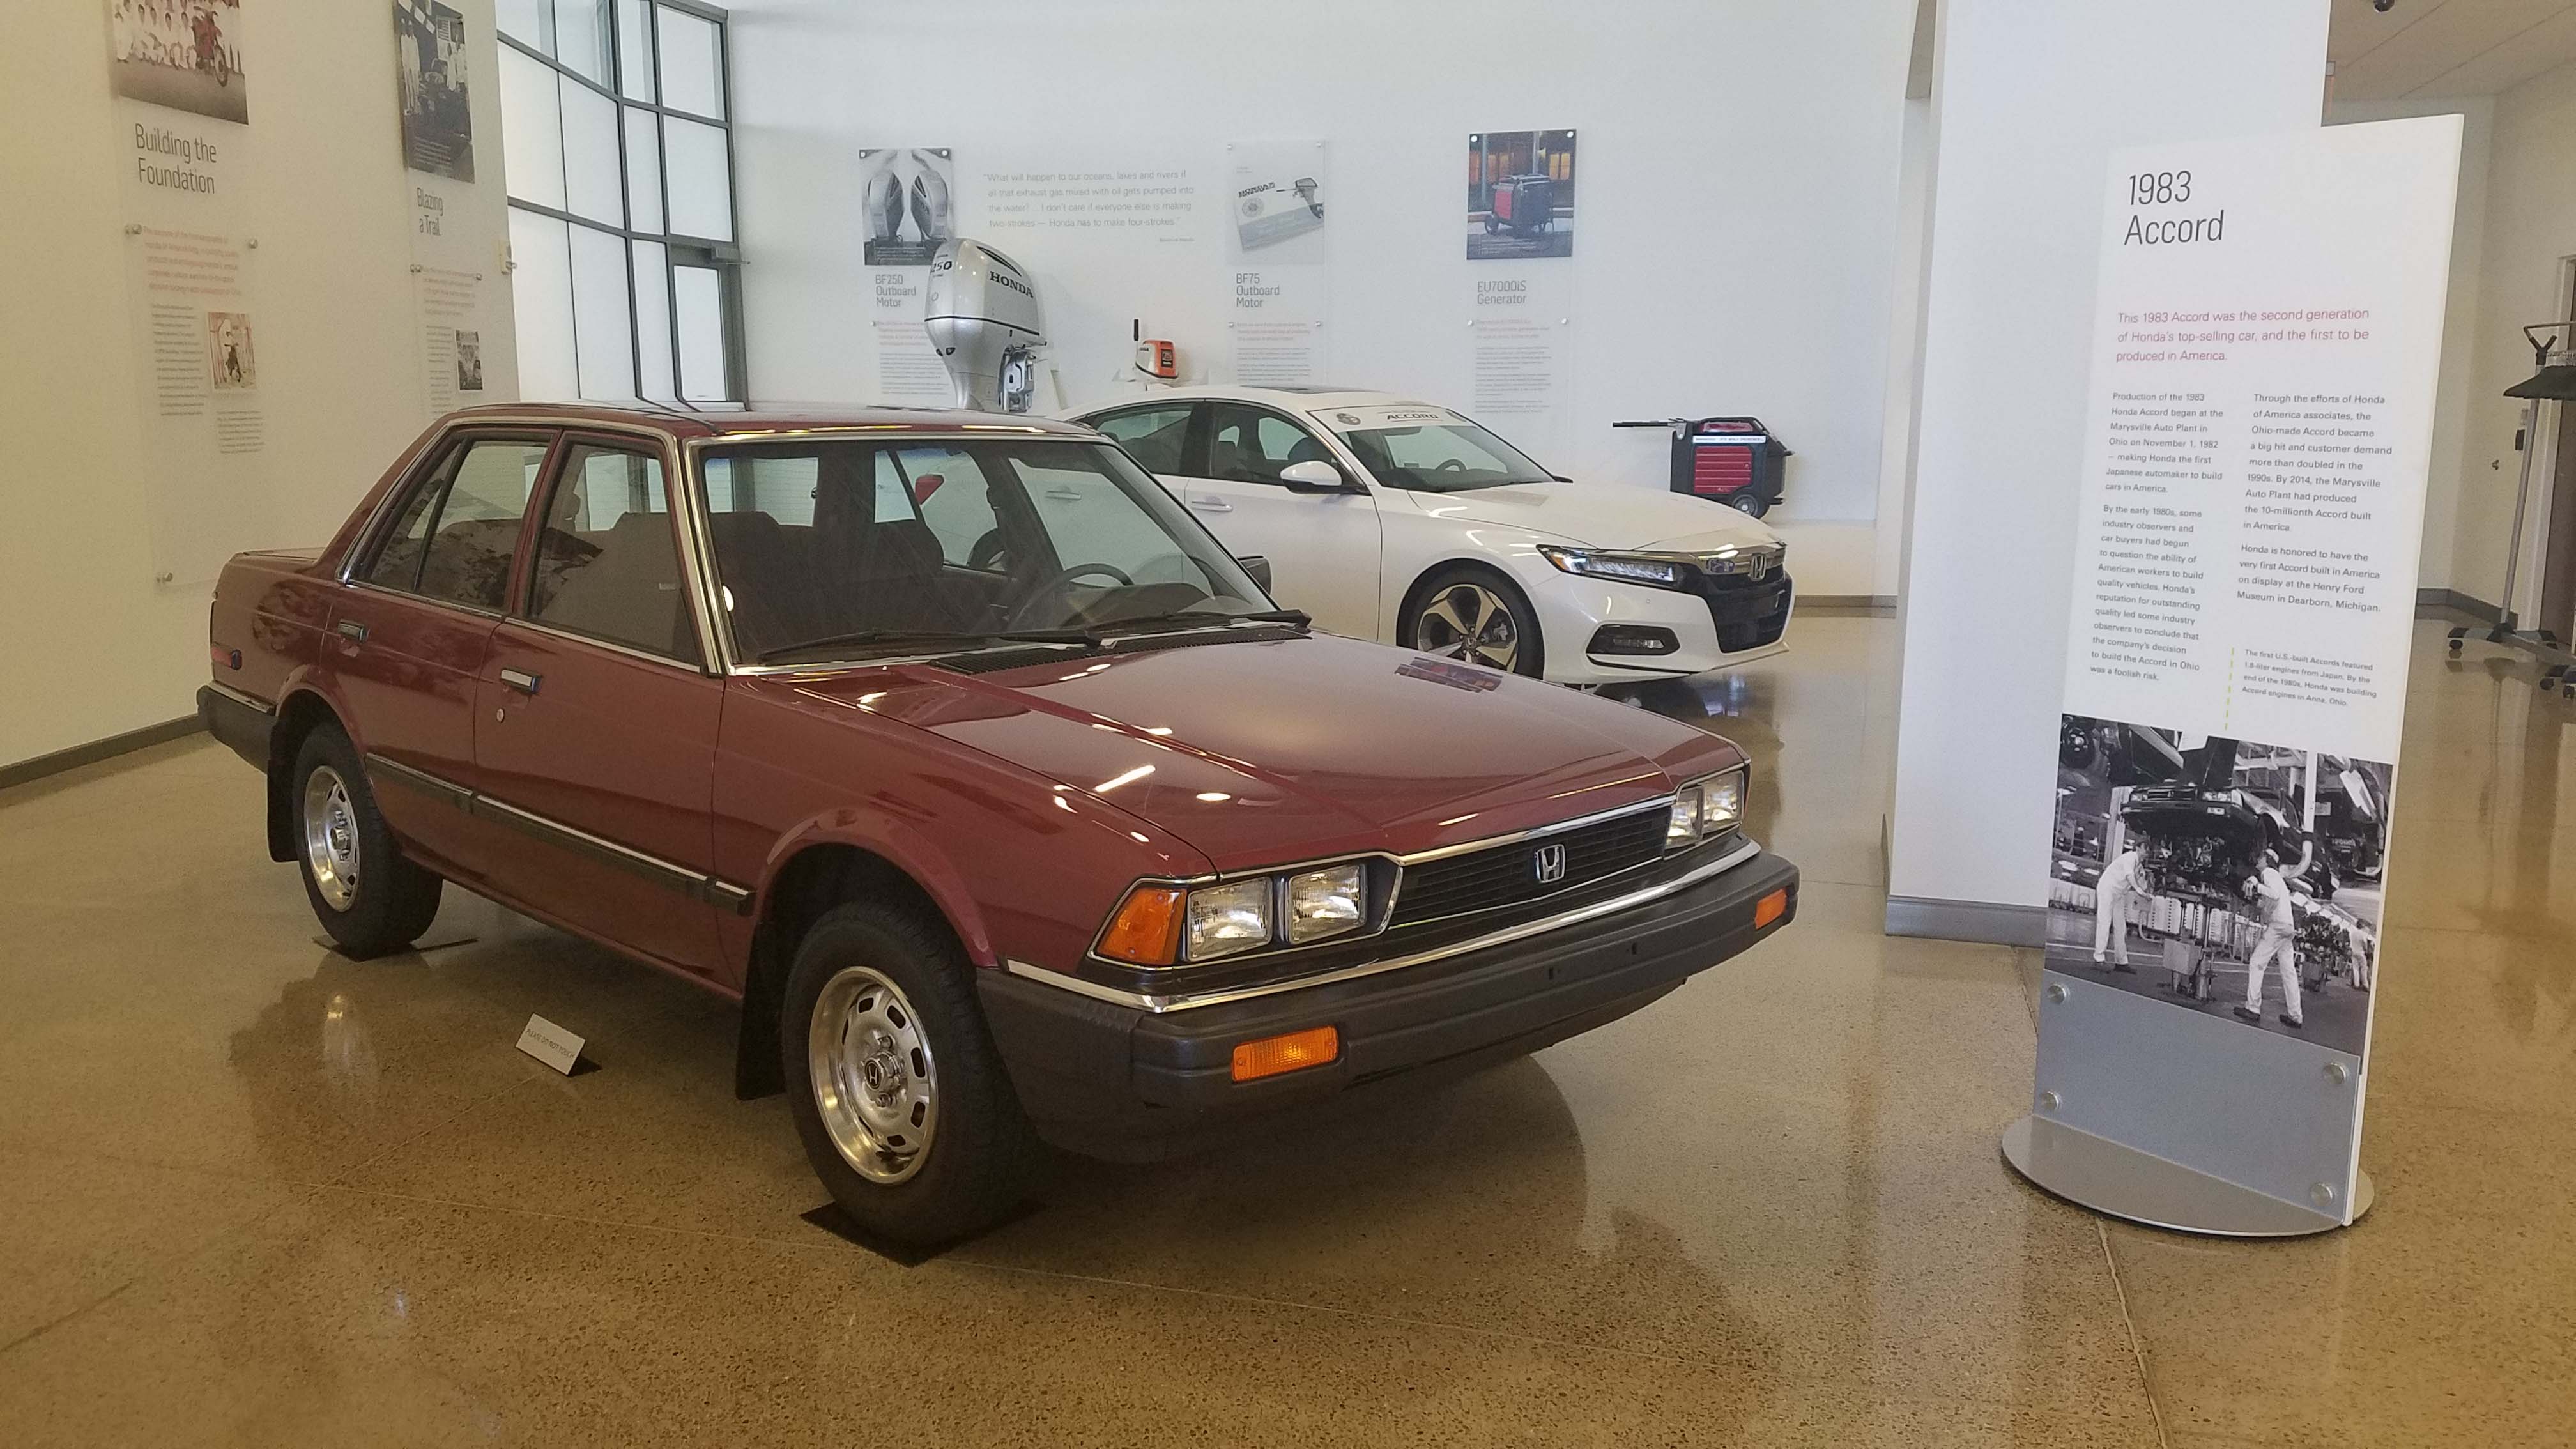 The Honda Marysville Plant produced its first car in 1982 -the 1983 model year Accord sedan.